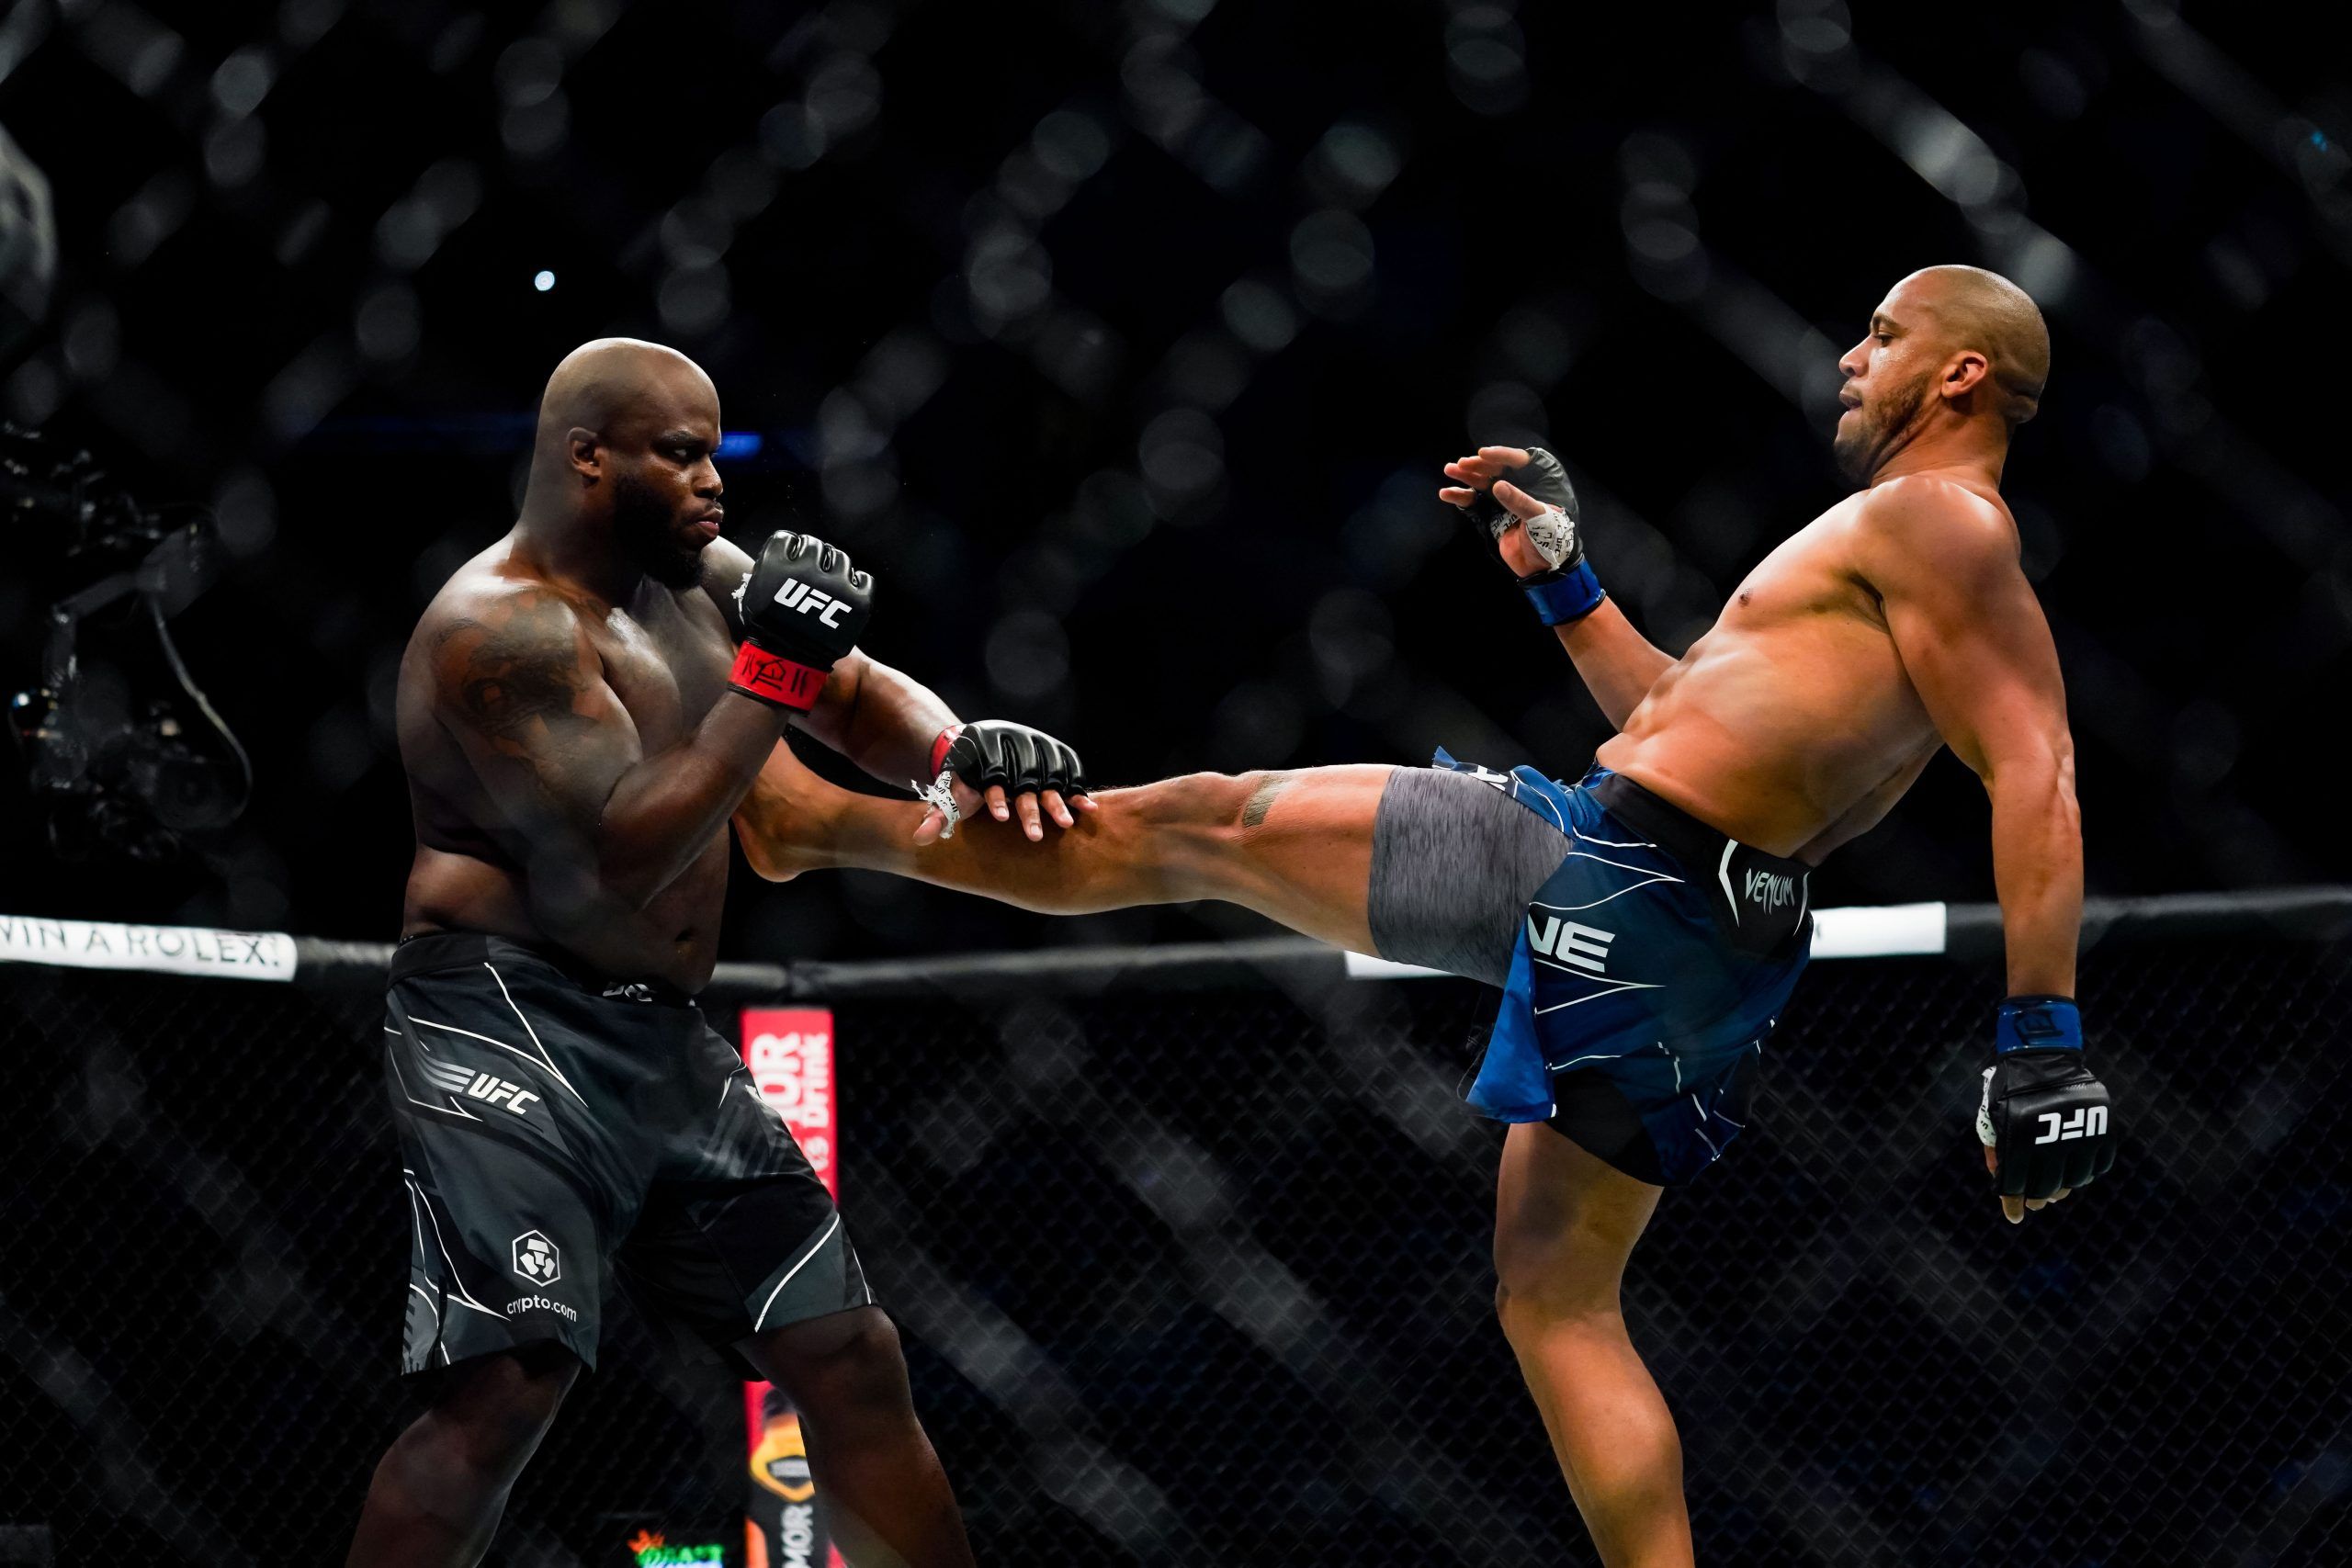 The Top 10 One-Punch Knockouts in the history of the UFC